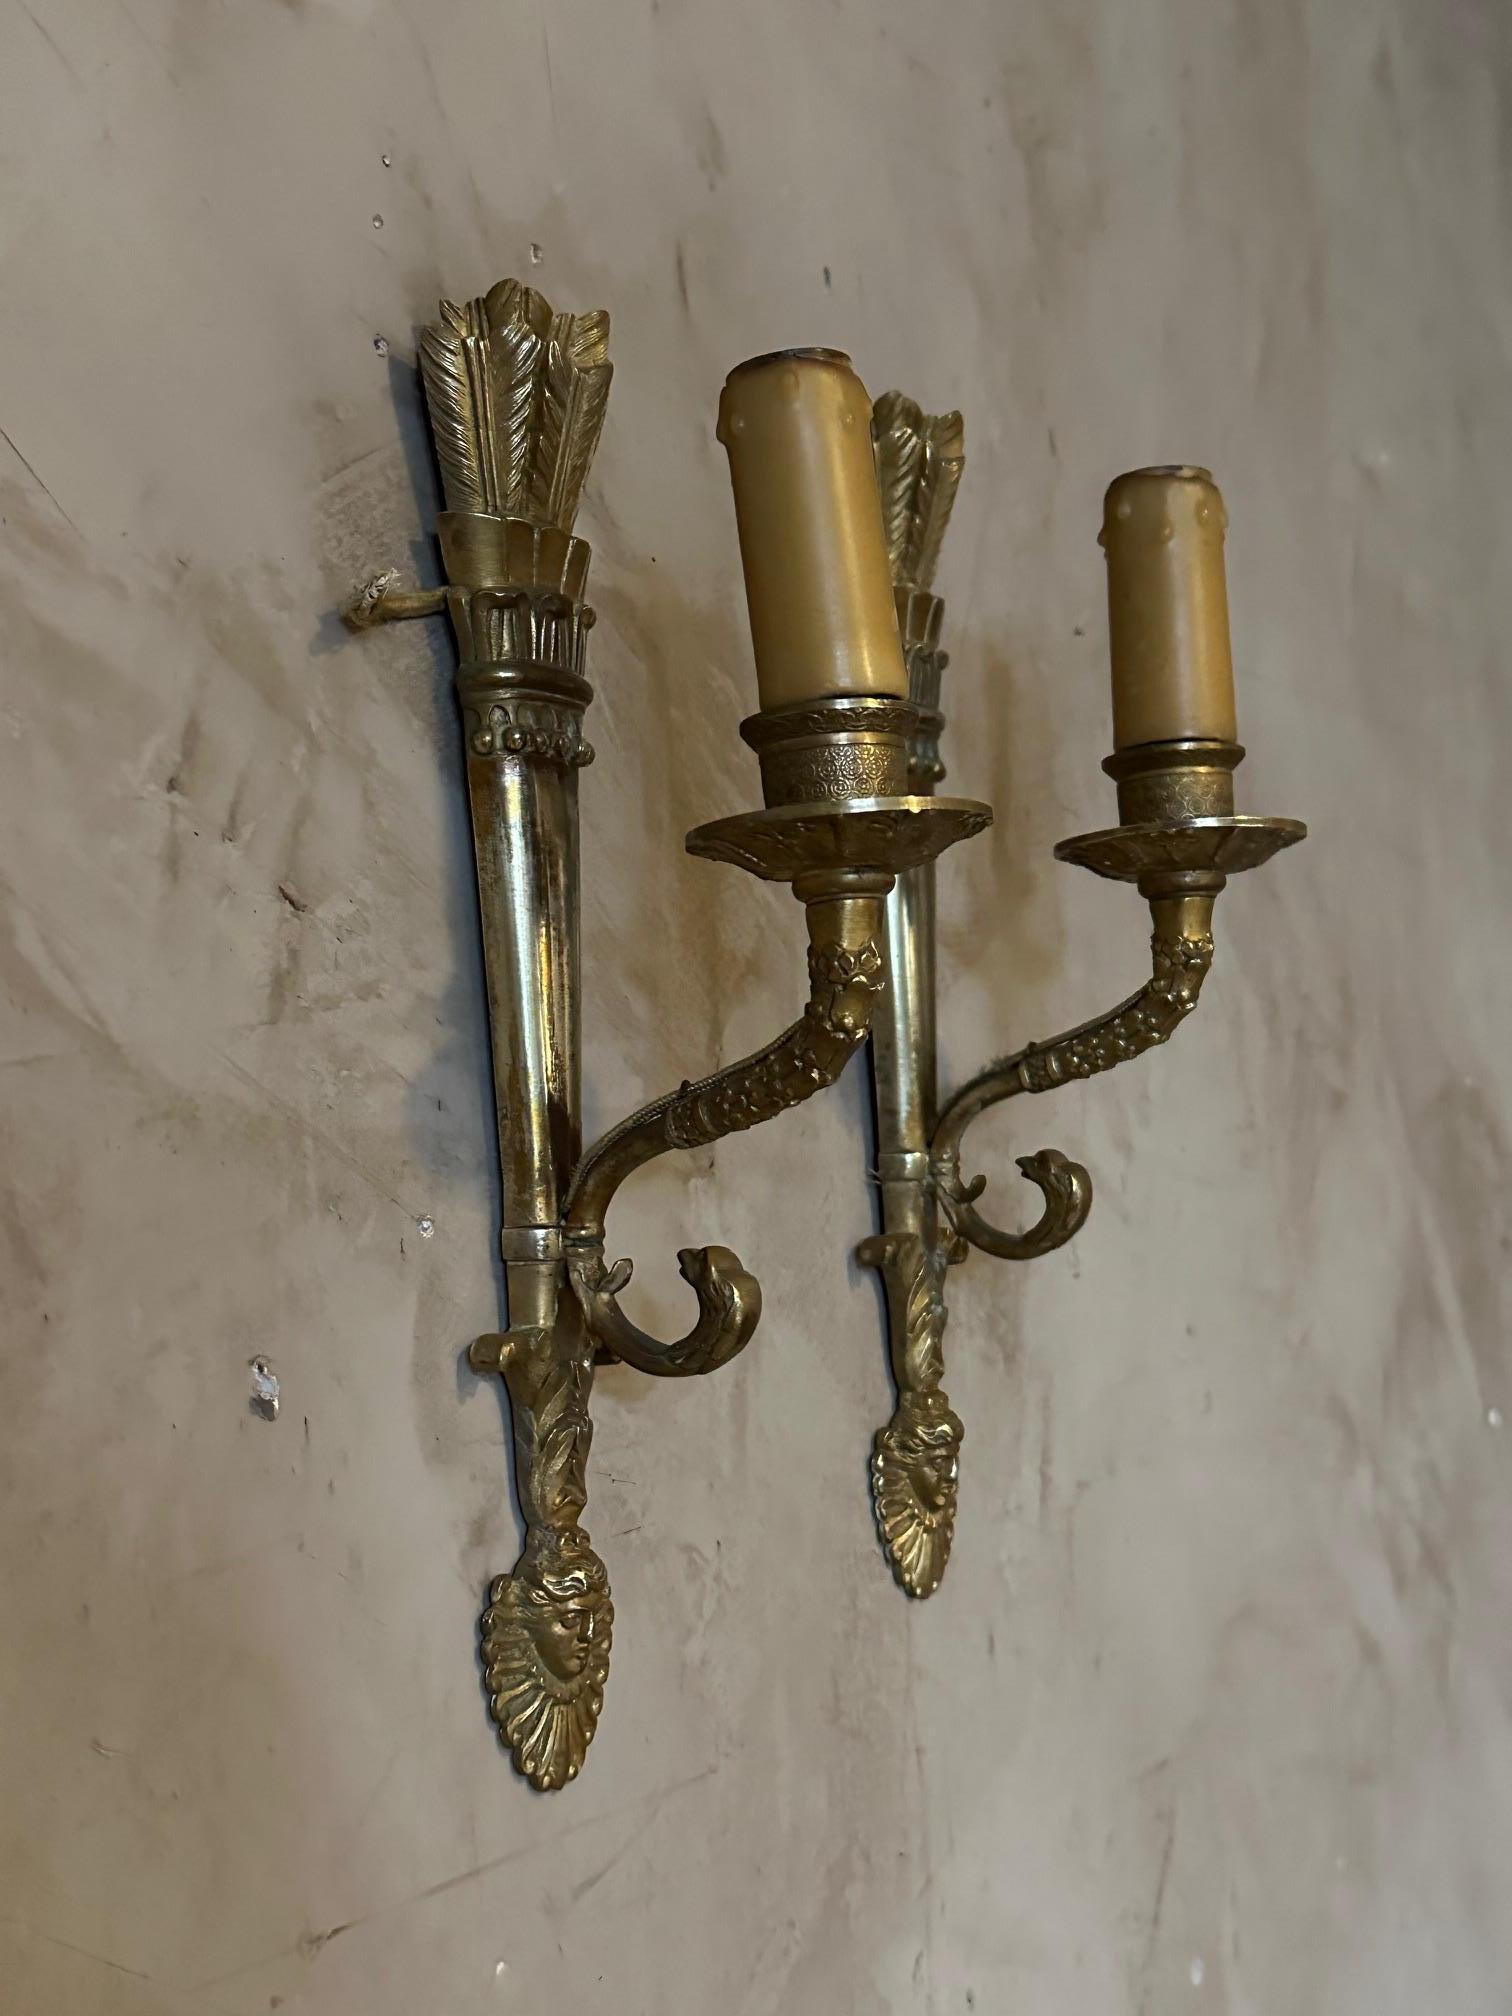 18th century French very beautiful pair of gilded bronze sconces from the Empire period in good condition.
Caryatid heads. Very elegant model. Electrification up to standards.
Nice quality.